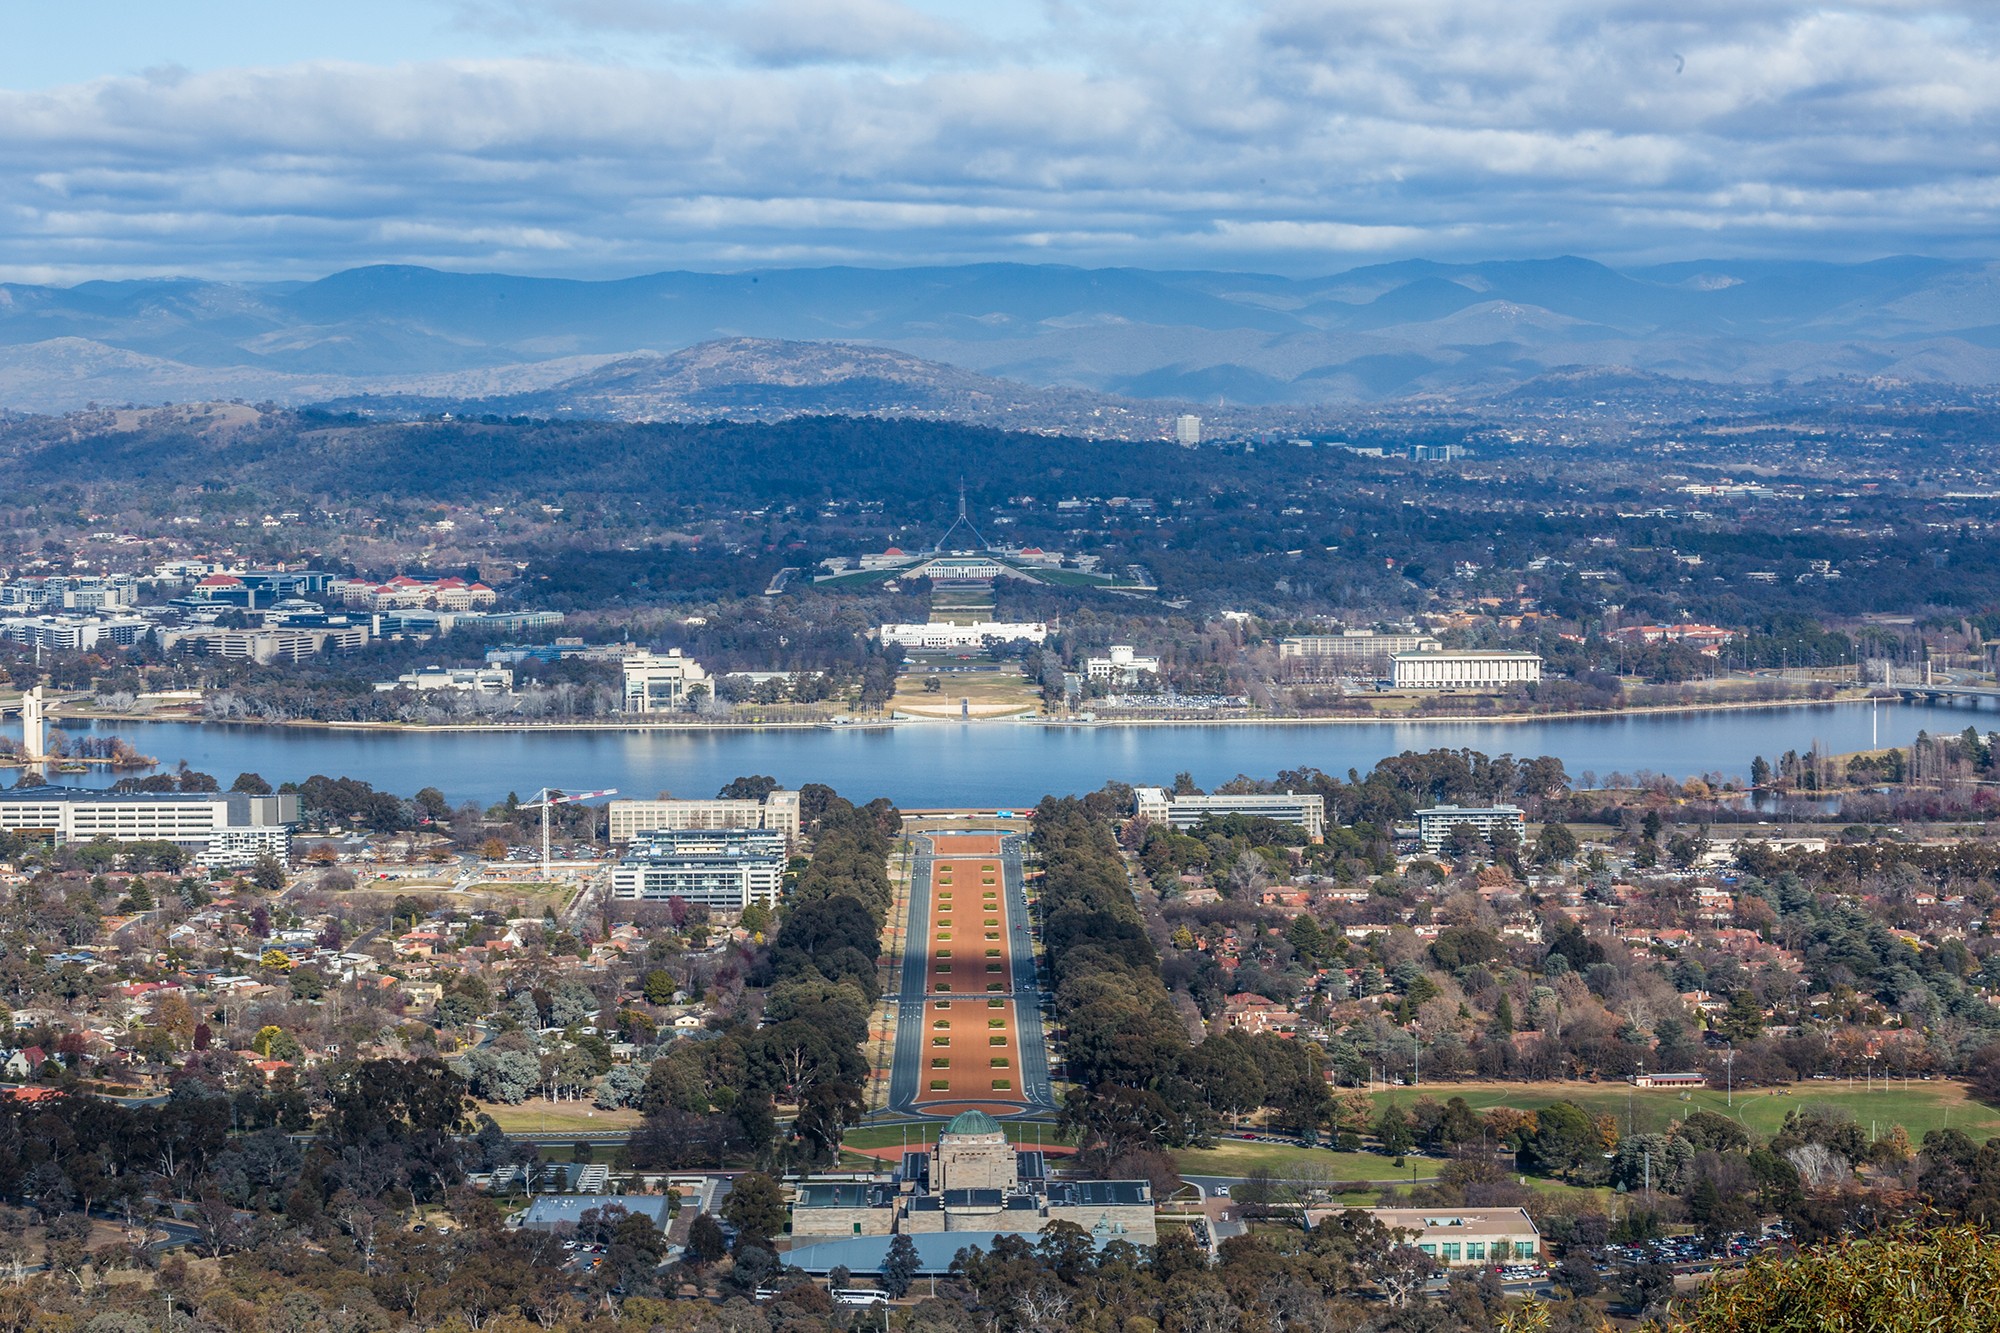 Light rail to Woden still in a fog but Canberra’s economy remains strong, says report